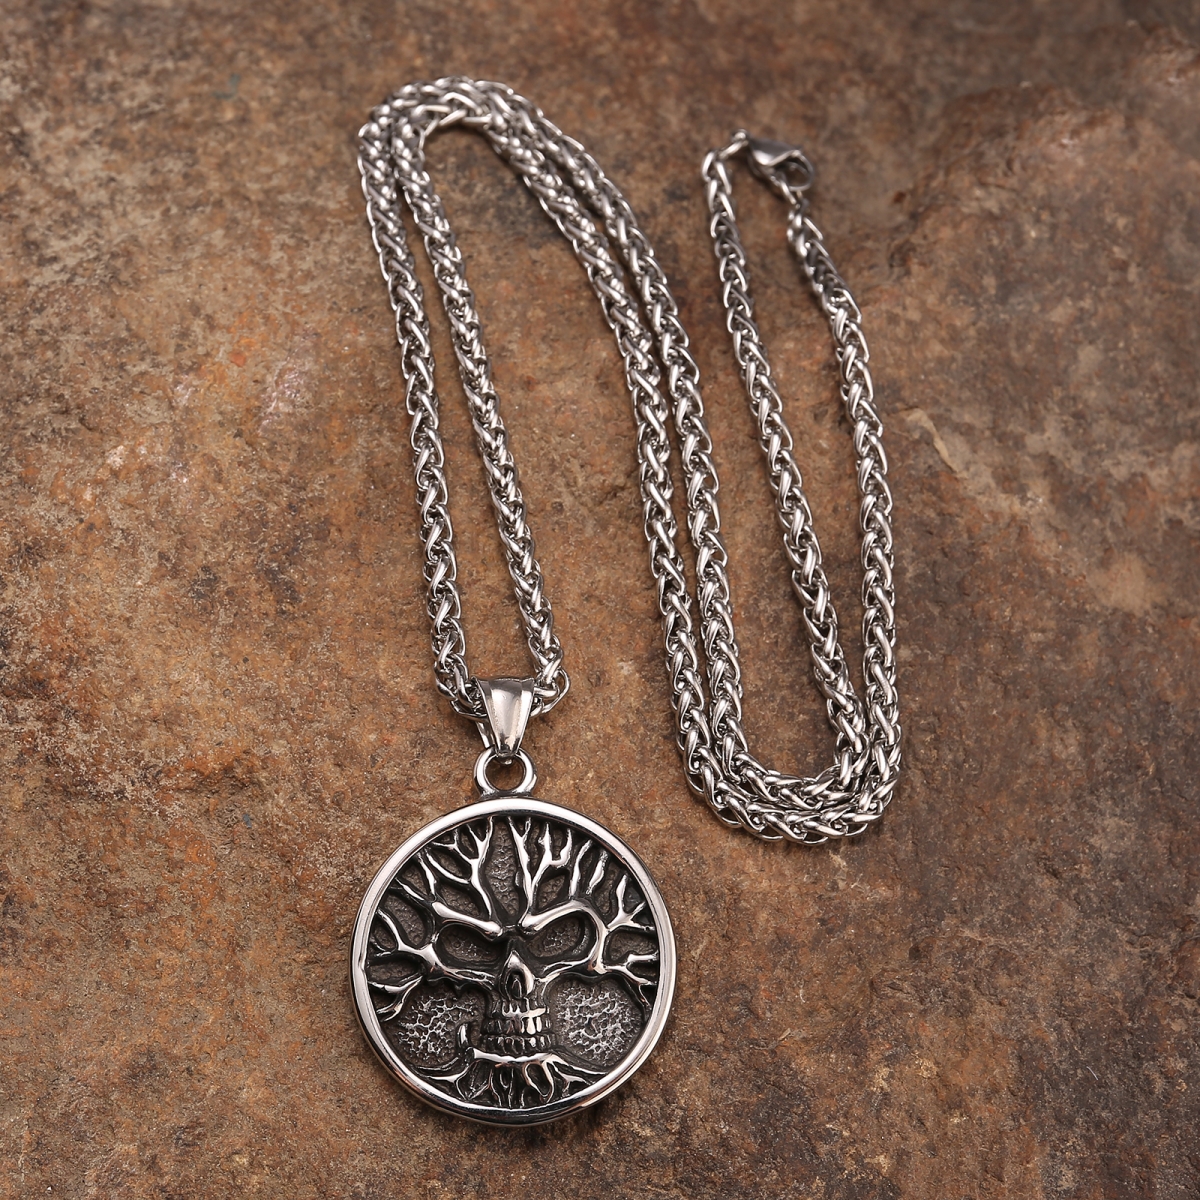 Yggdrasill Necklace US$3.2/PC-NORSECOLLECTION- Viking Jewelry,Viking Necklace,Viking Bracelet,Viking Rings,Viking Mugs,Viking Accessories,Viking Crafts